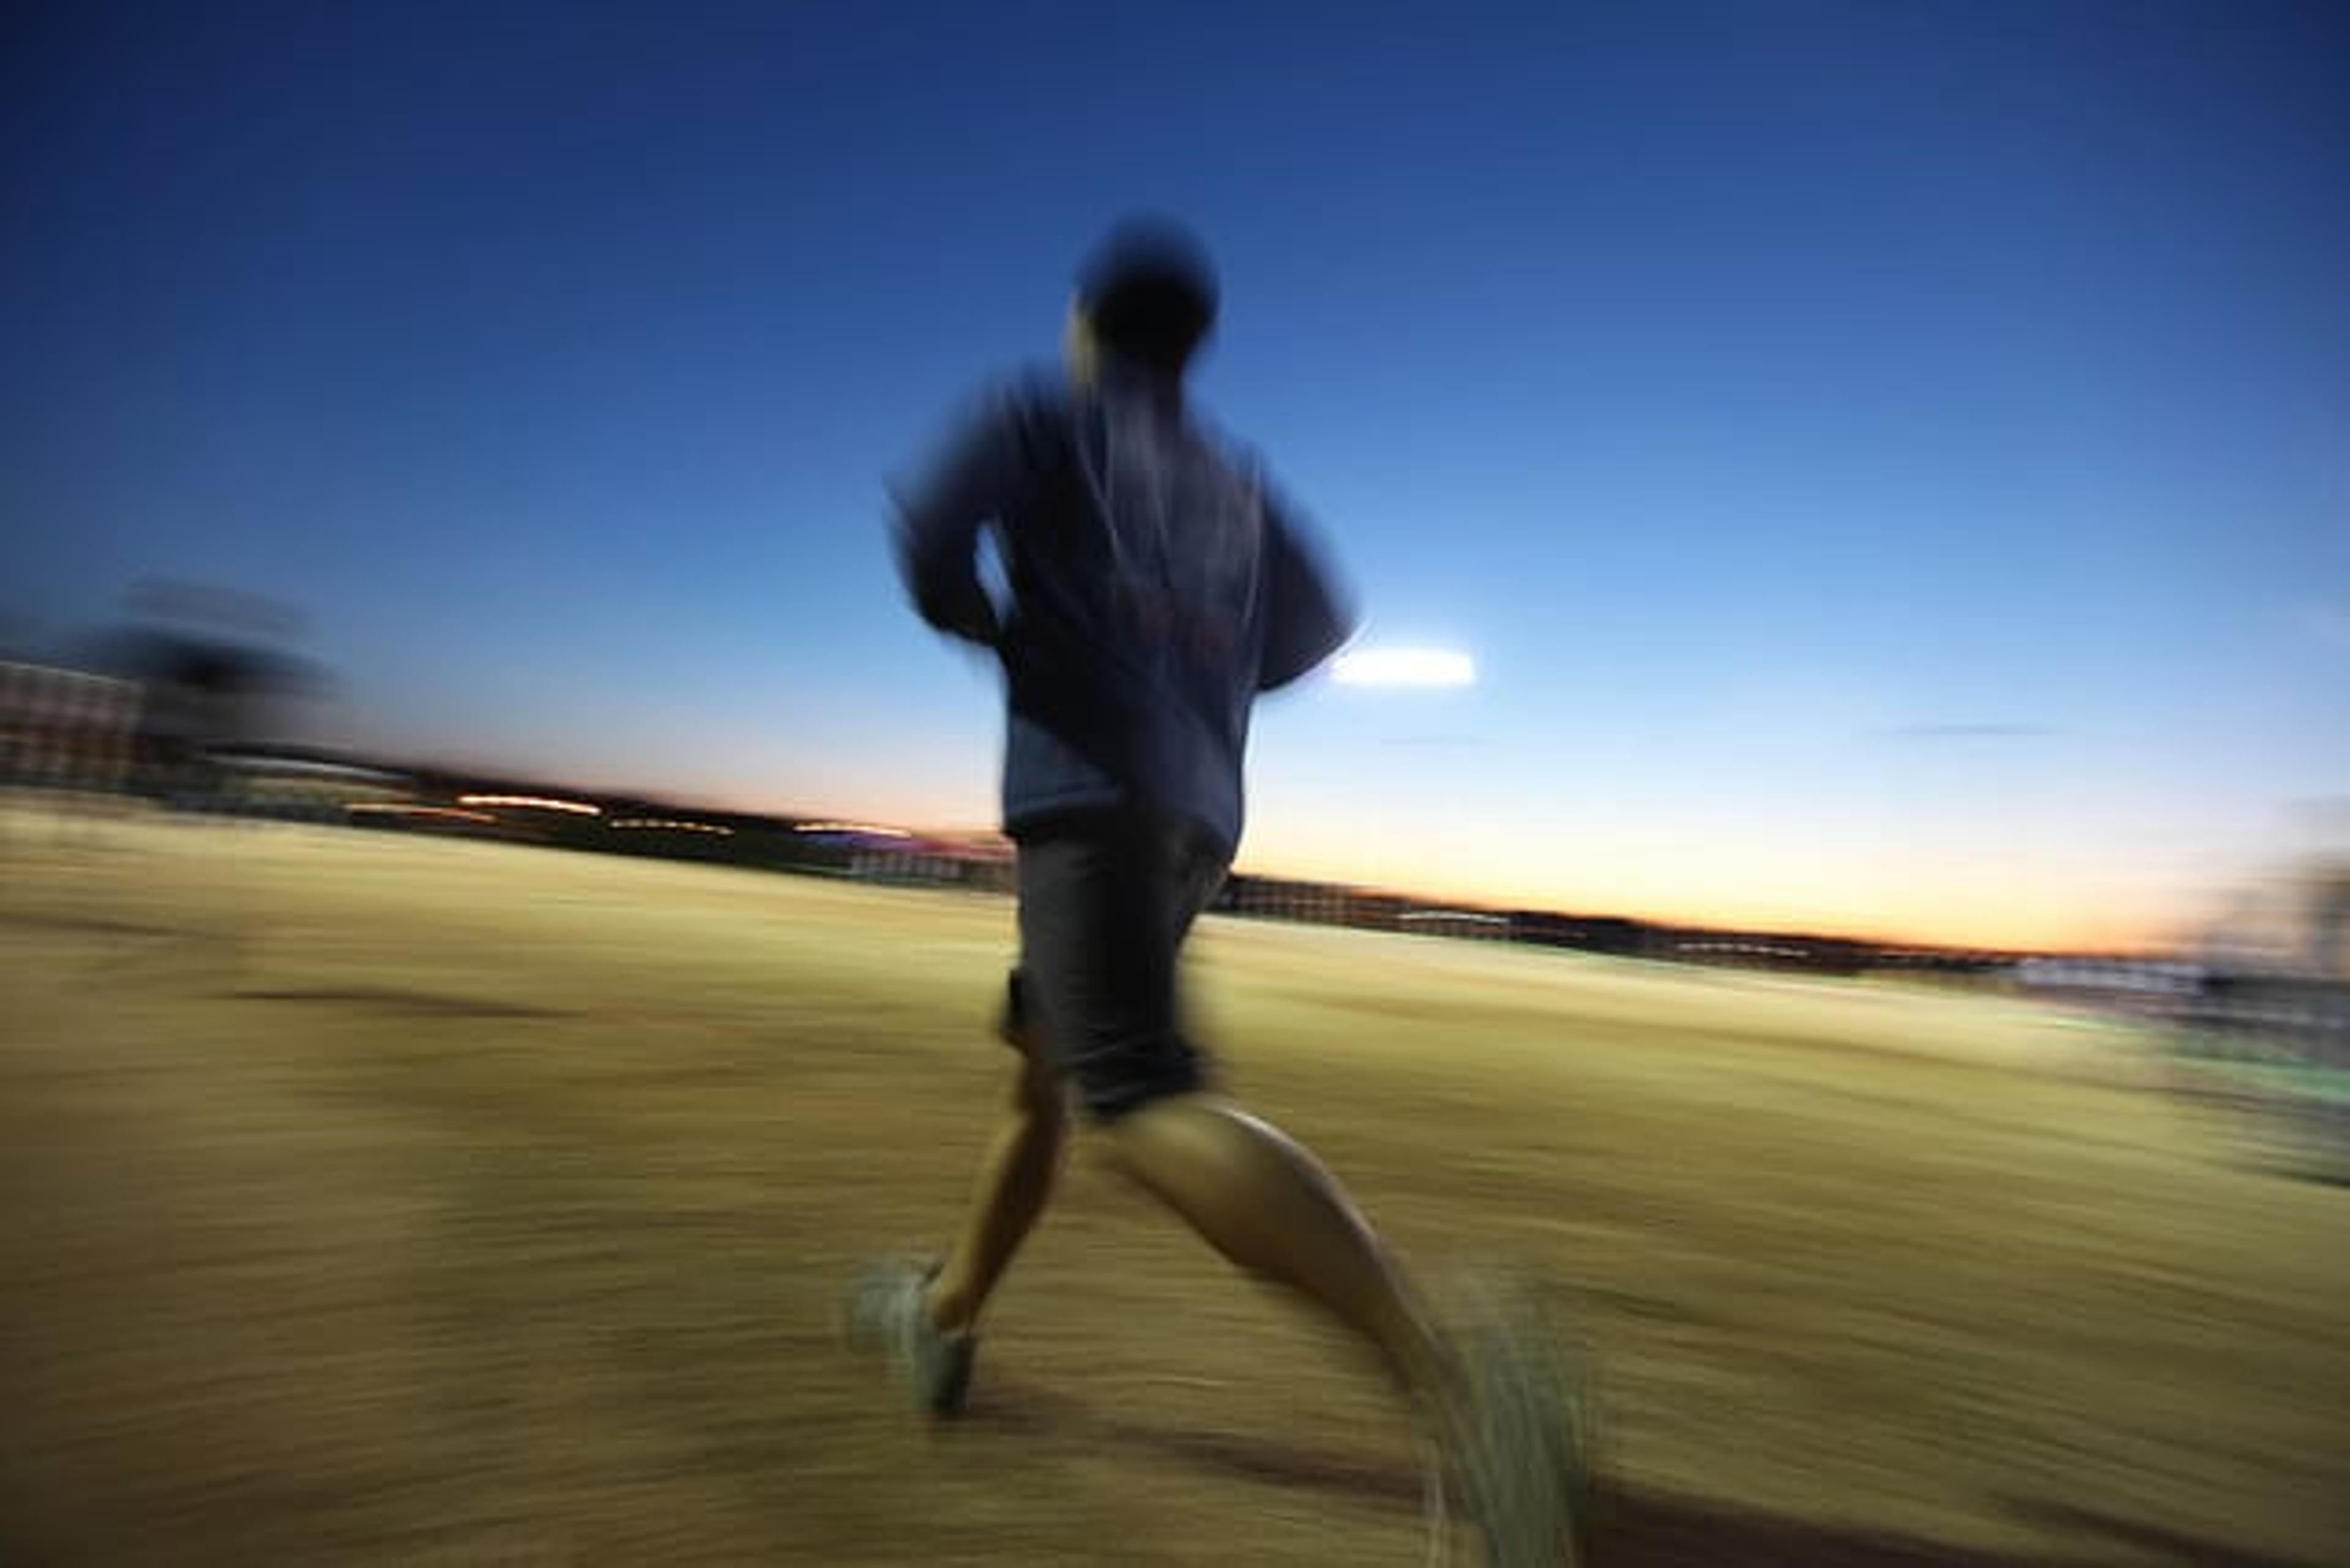 How to run safely at night